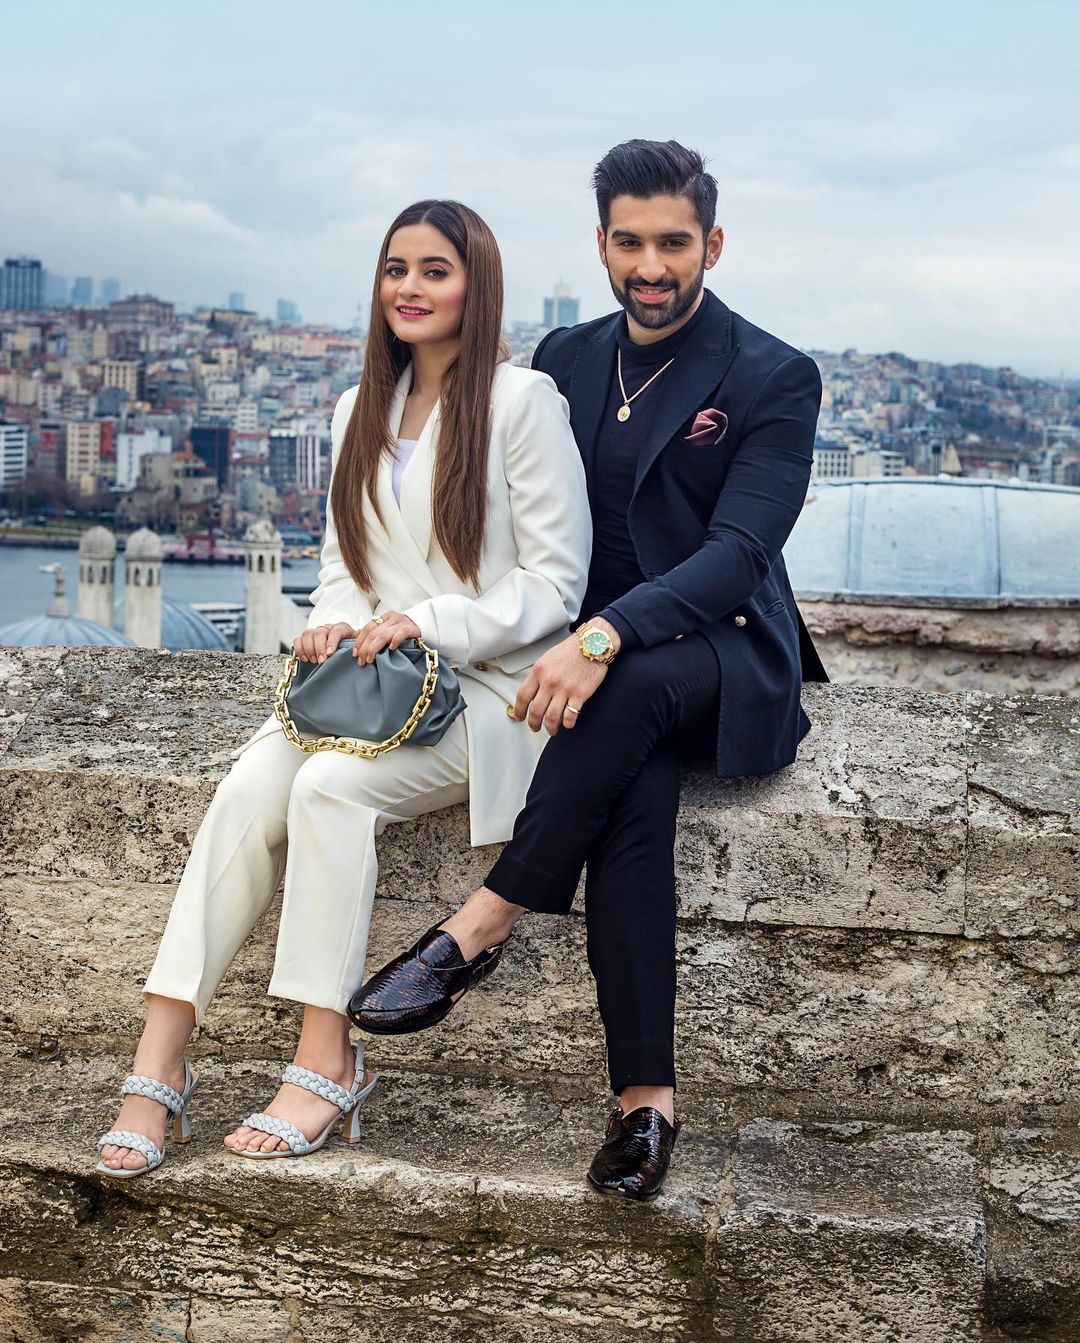 Aiman Khan and Muneeb Butt giving Boss Vibes in recent pictures